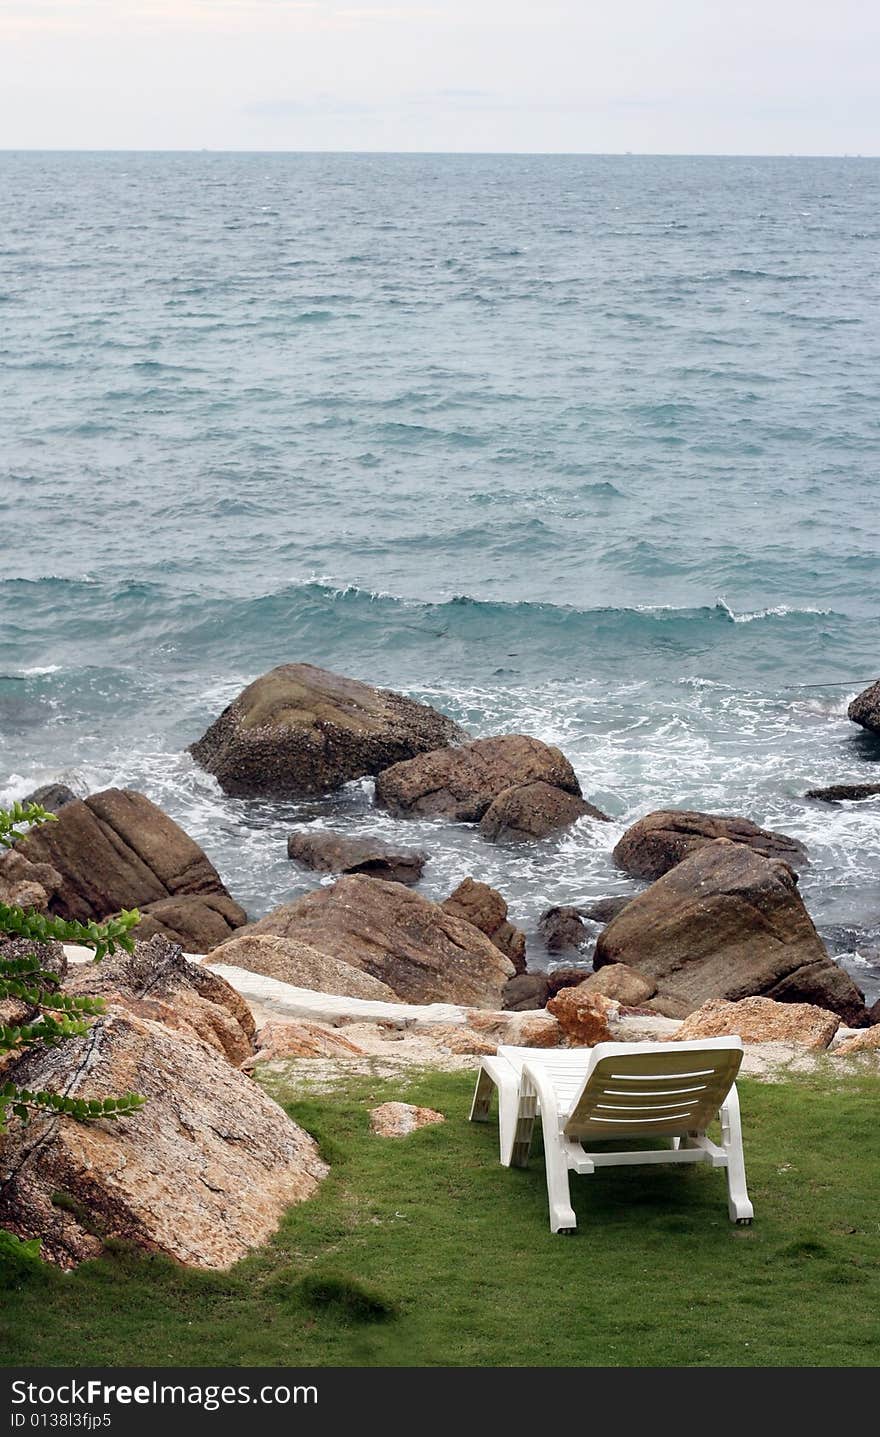 White deck chair overlooking the ocean with rocks on the shore.